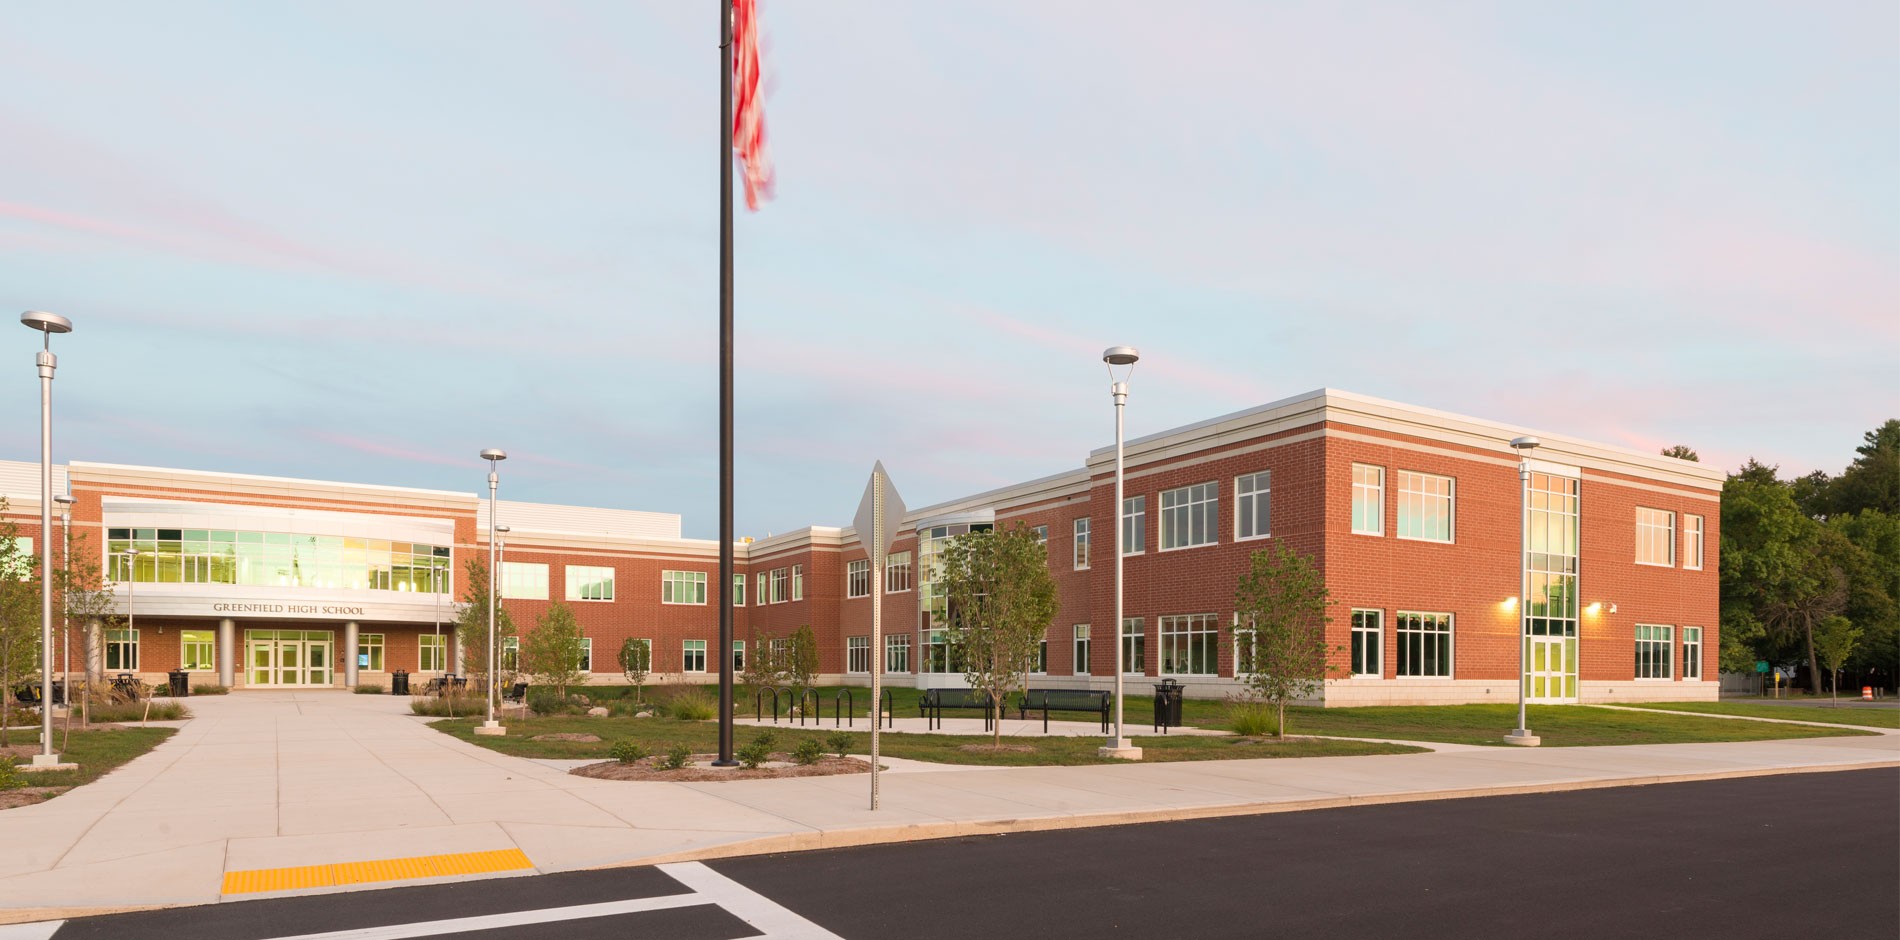 Greenfield MA High School Ground Up Addition Renovation Project